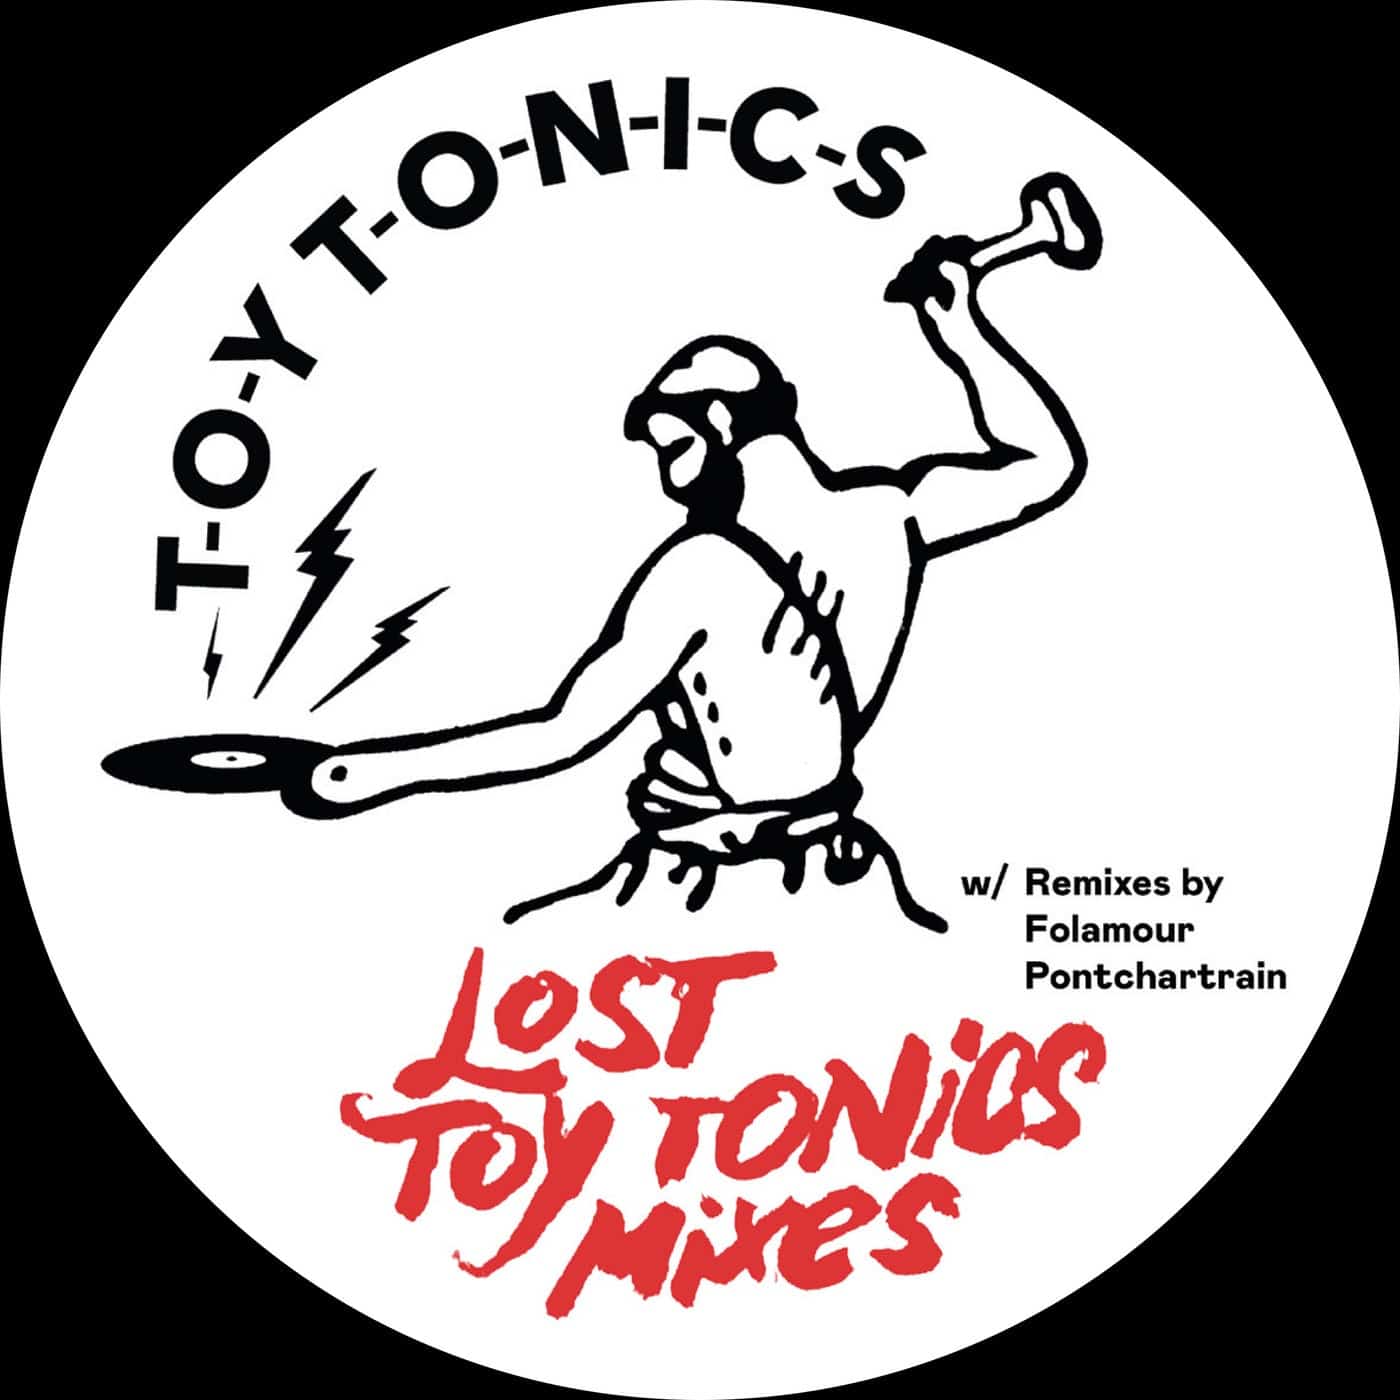 Download Lost Toy Tonics Mixes on Electrobuzz